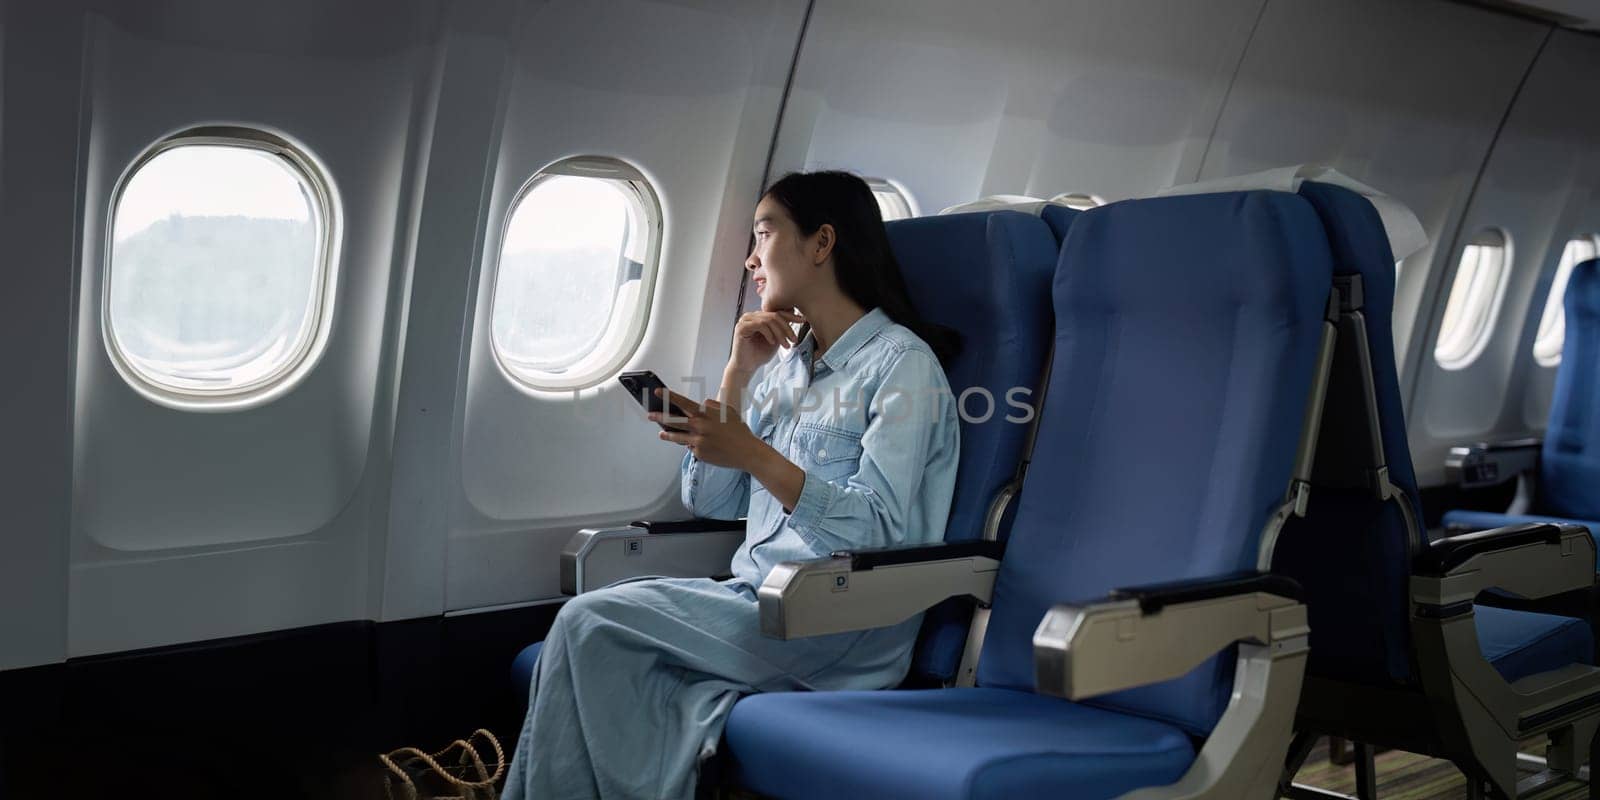 Asian people female person onboard, airplane window, using mobile while on the plane.